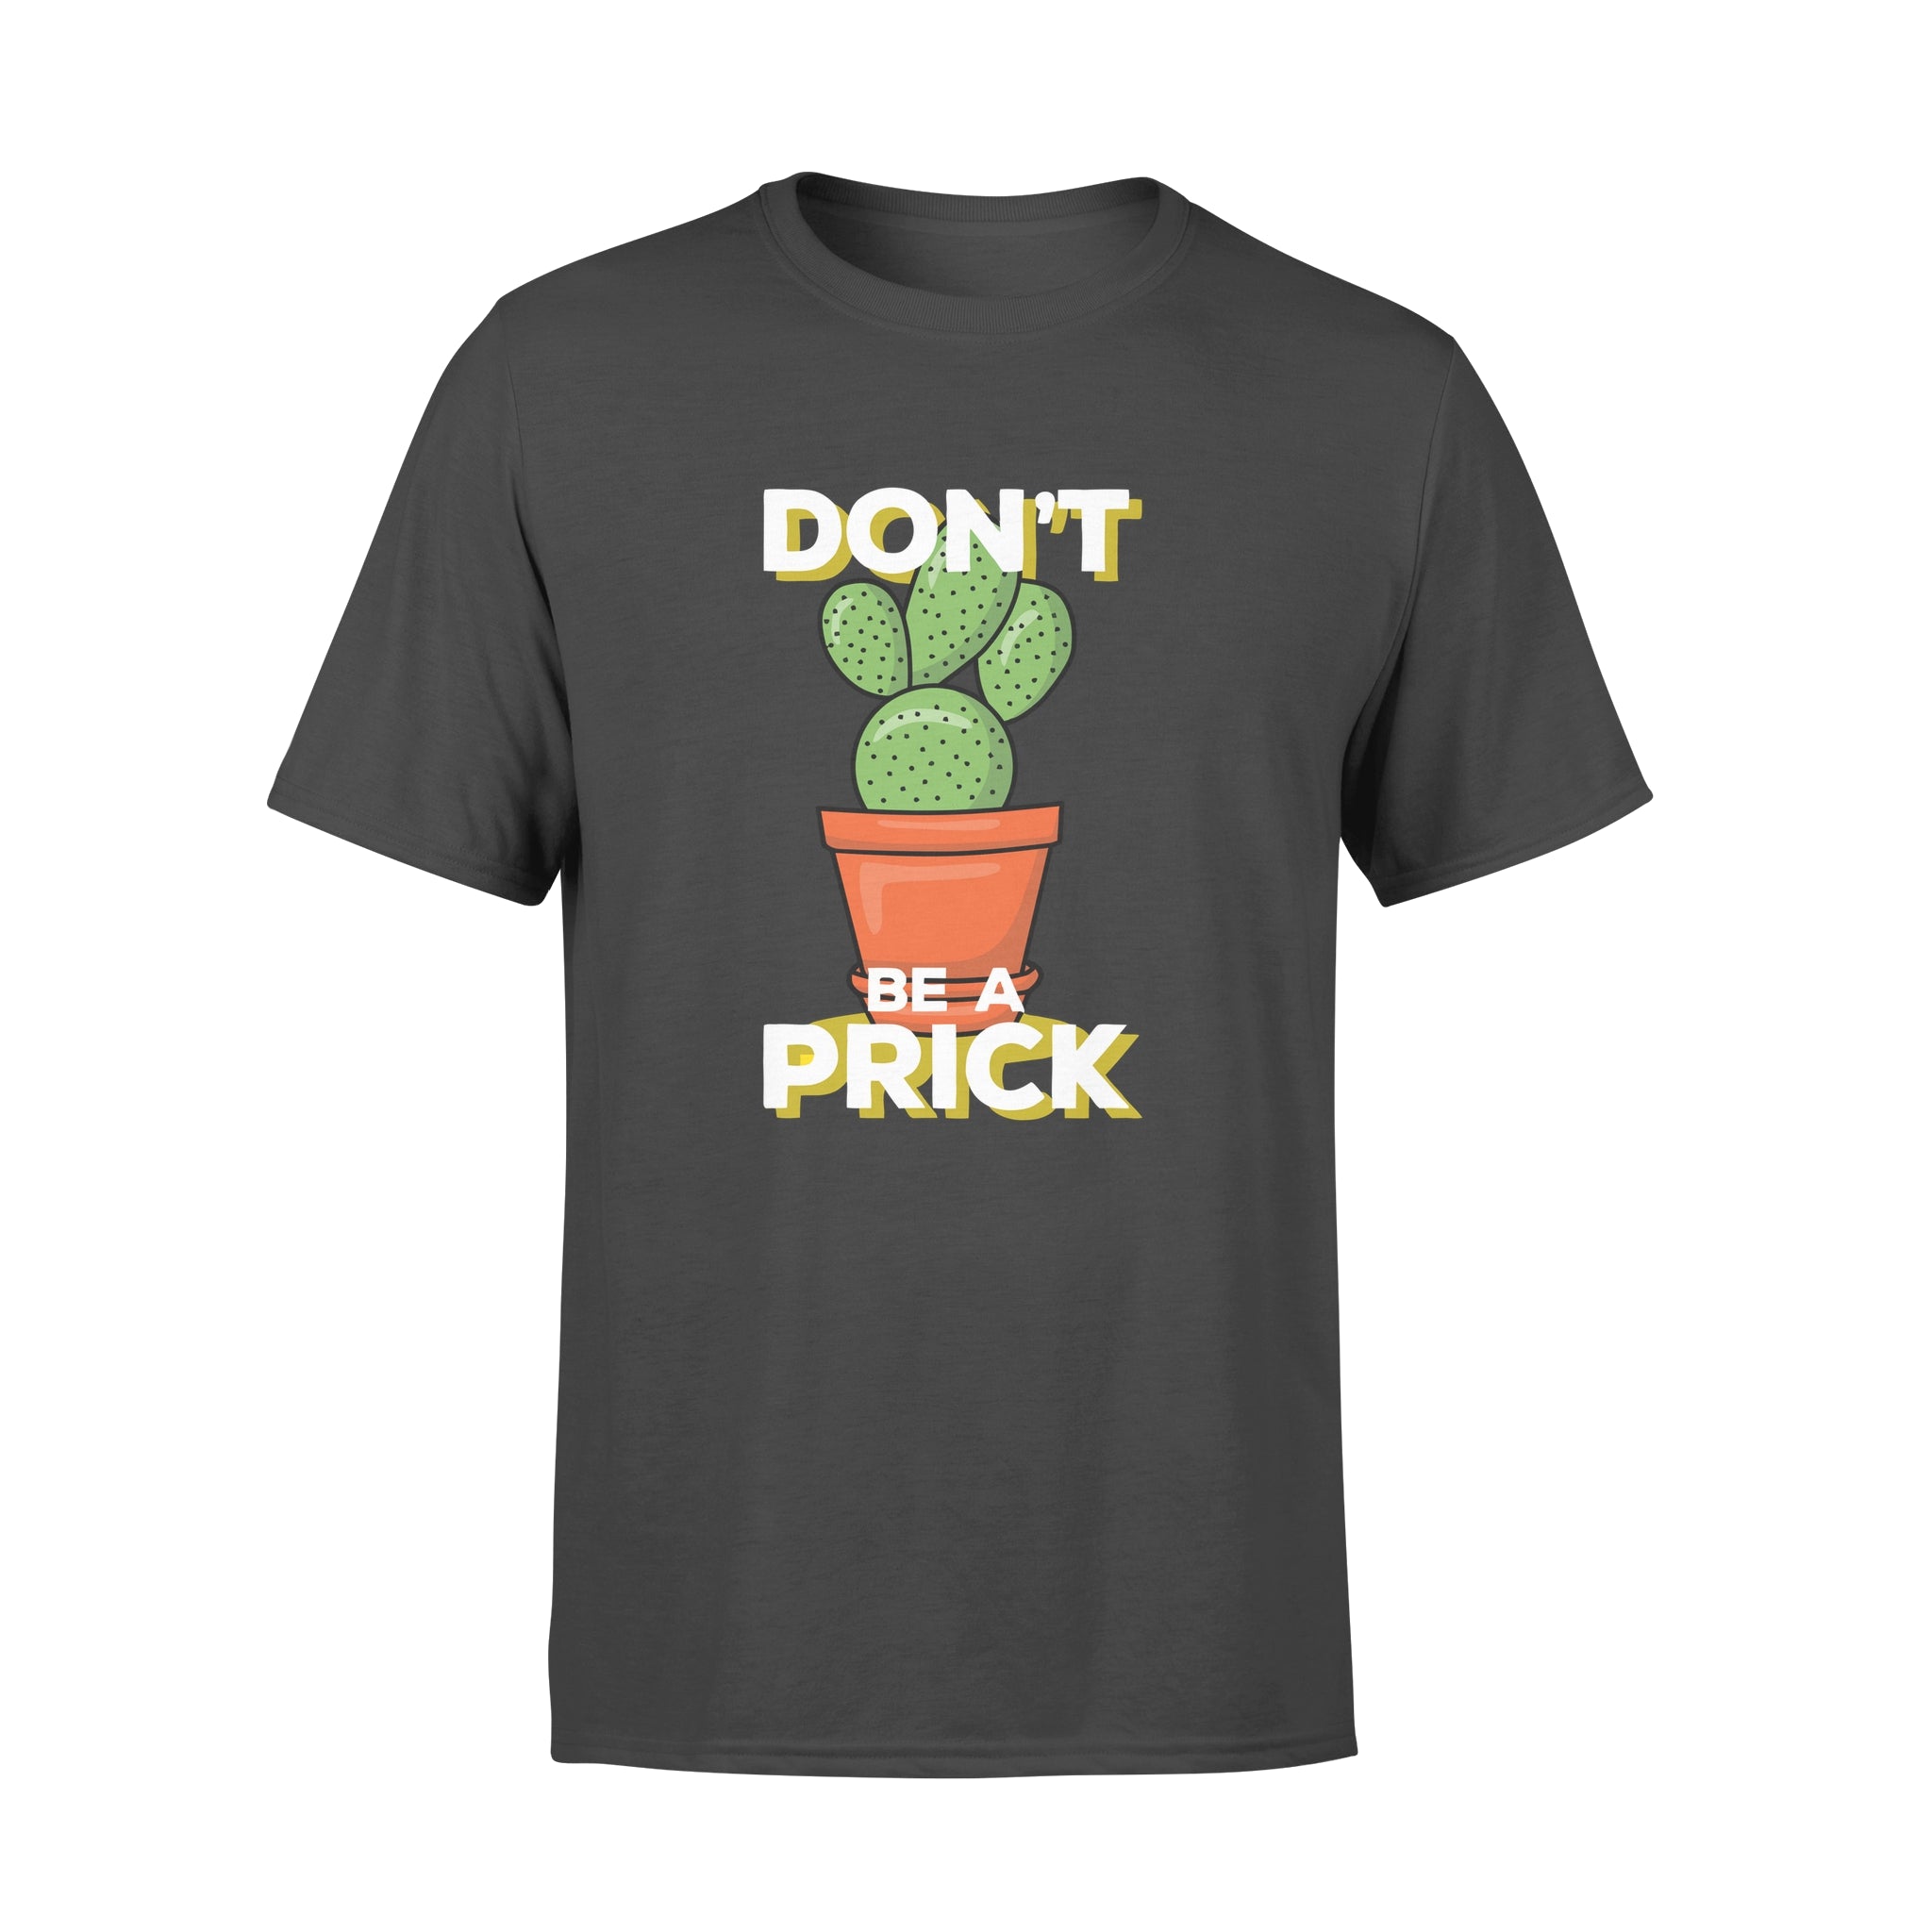 Don't Be A Prick - T-shirt